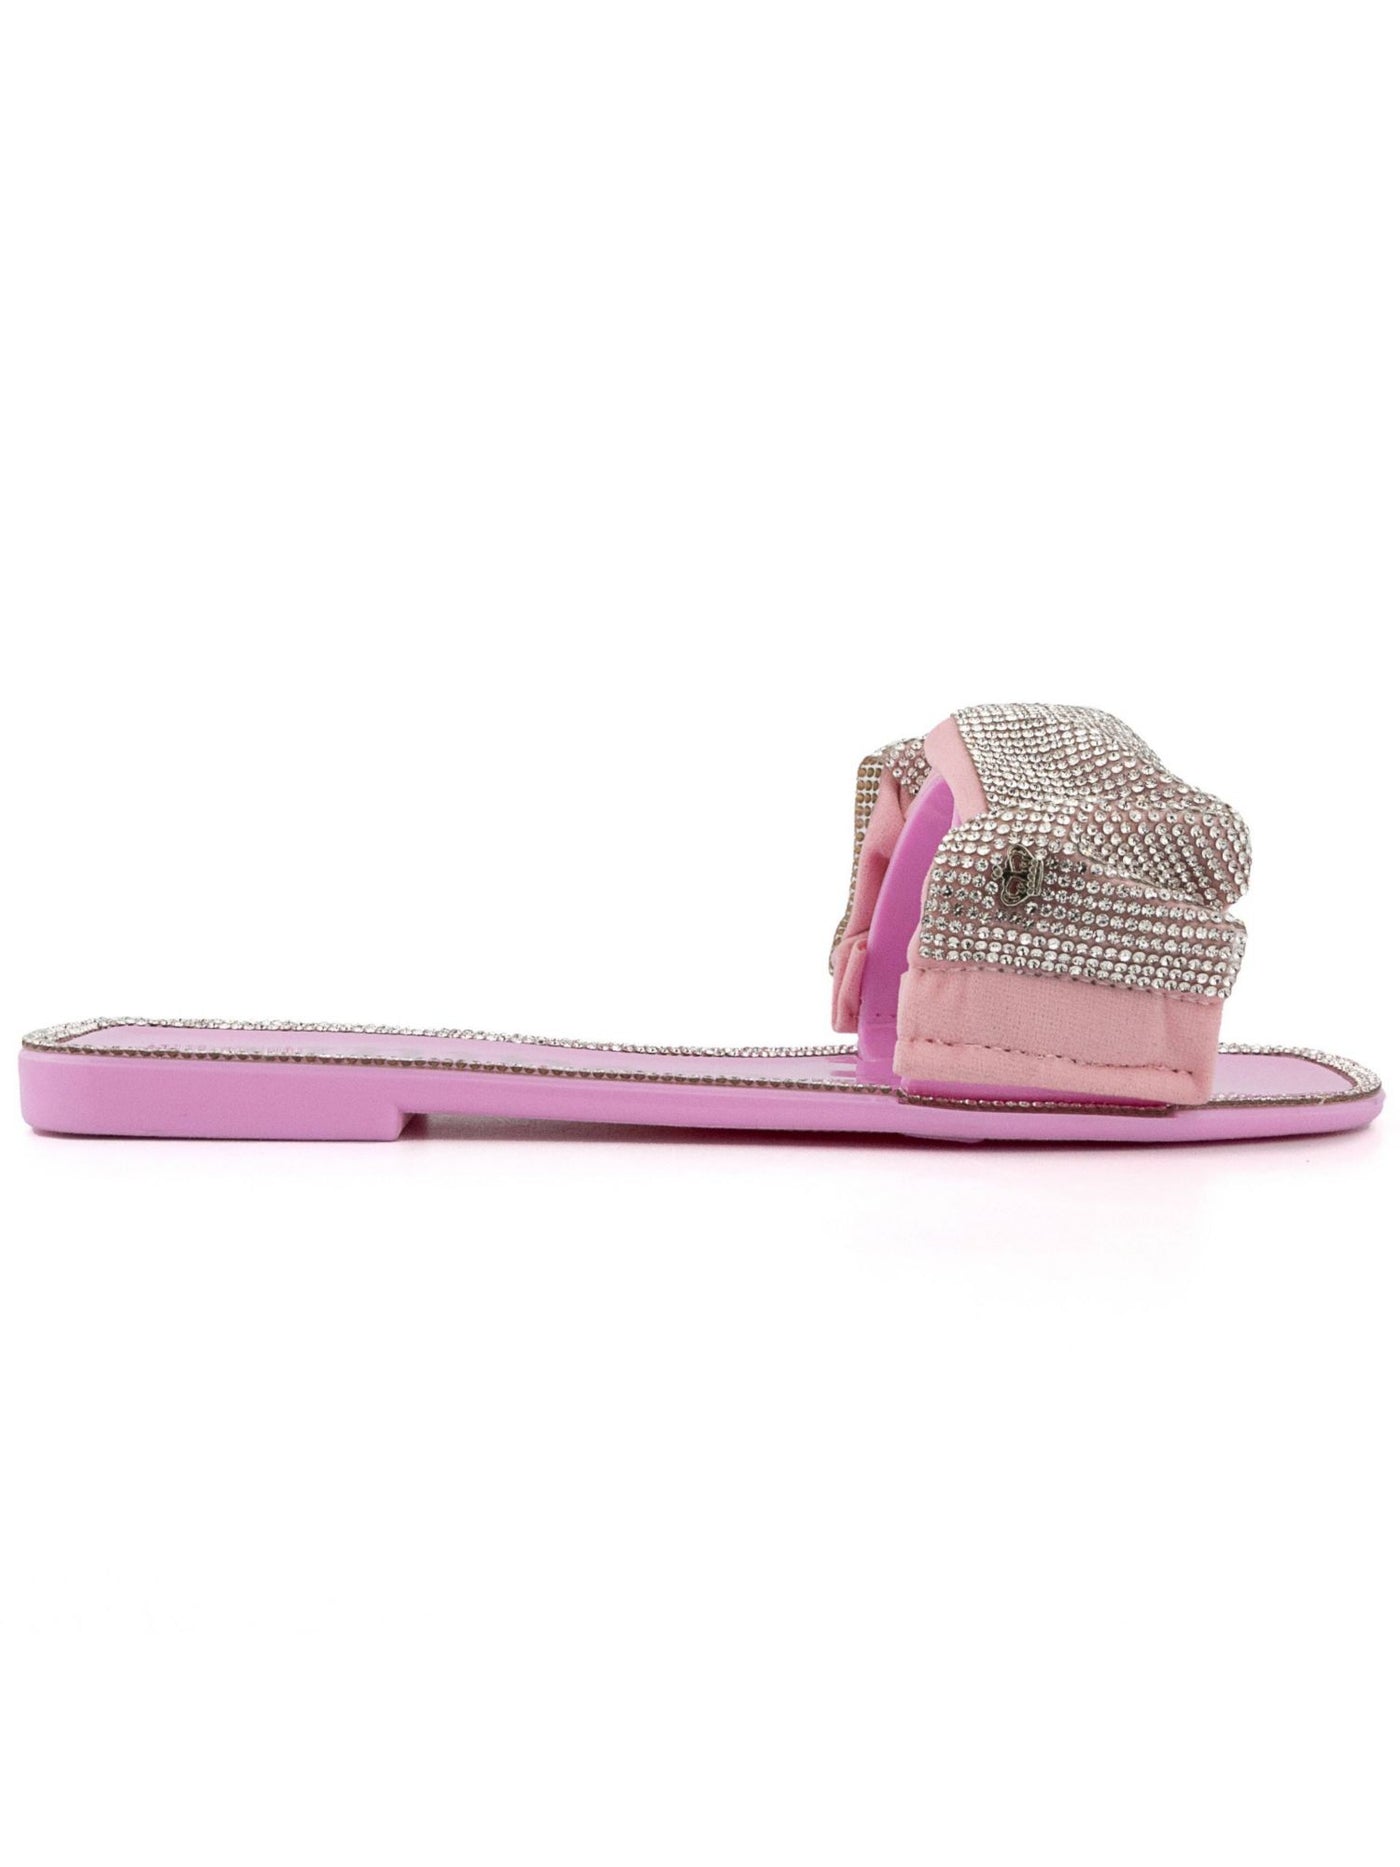 JUICY COUTURE Womens Pink Mixed Media Metallic Logo Embellished Hollyn Round Toe Slip On Slide Sandals 5 M